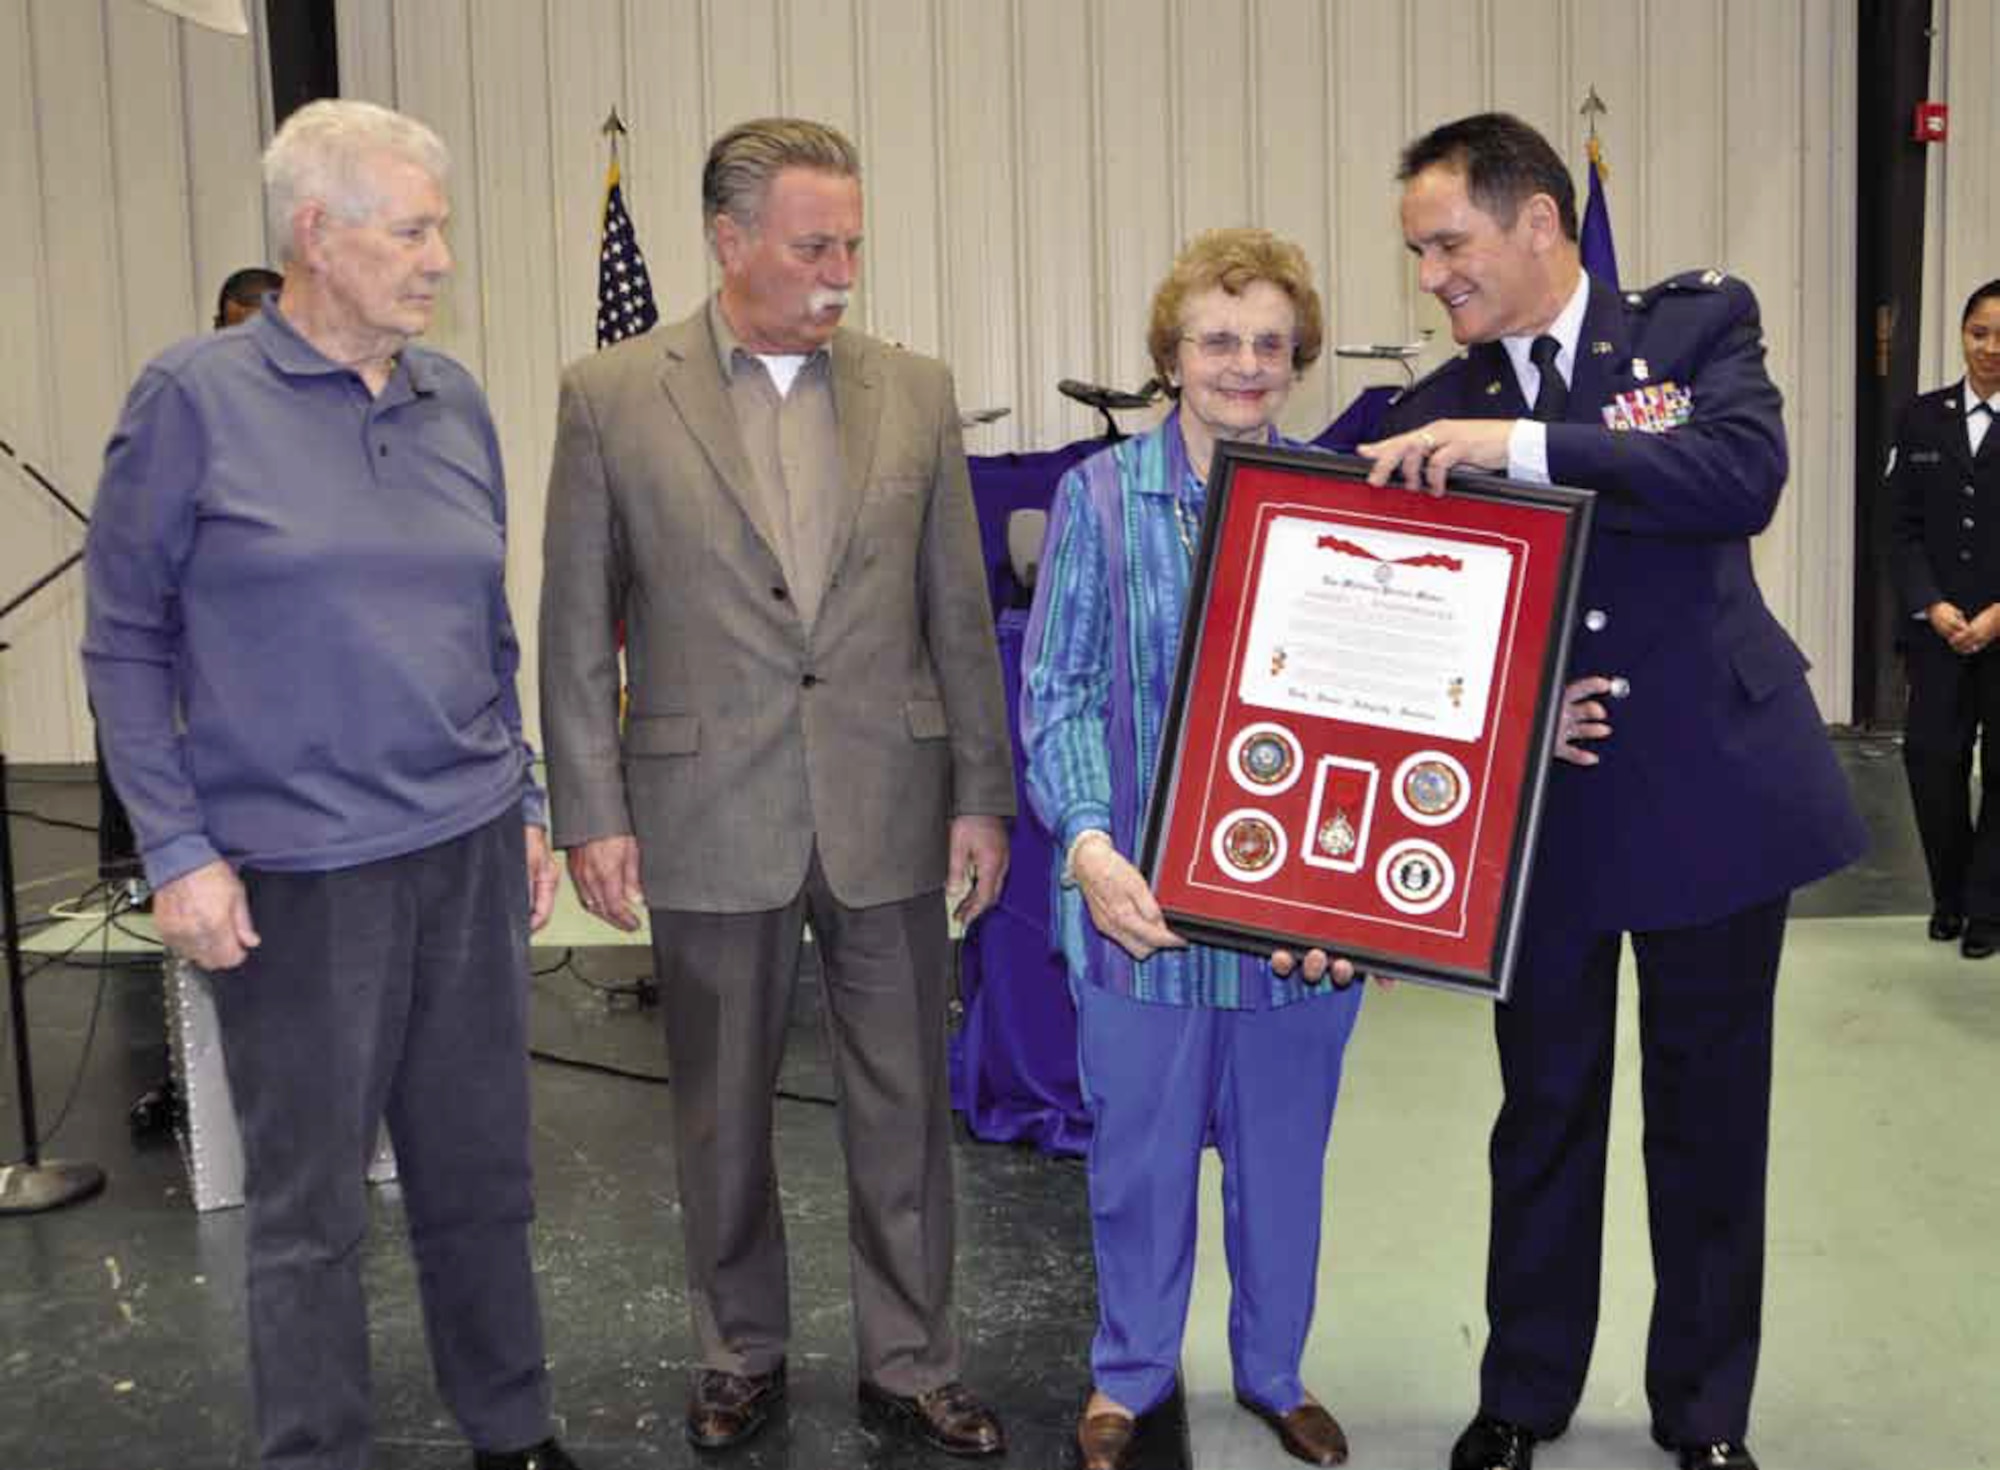 Col. Robert Weisenberger, 452d Medical Group commander, presents the Military Parent Award to his mother Harriet, a Navy nurse during WWII, Sunday, Feb. 24, 2013, at his retirement ceremony in the March Field Air Museum. Joining her for the presentation are his older brothers, Jim, a combat Marine veteran during Vietnam standing next to Harriet, and Paul, who served in the Army during the Korean war. (U.S. Air Force photo by Staff Sgt. Carrie Peasinger)